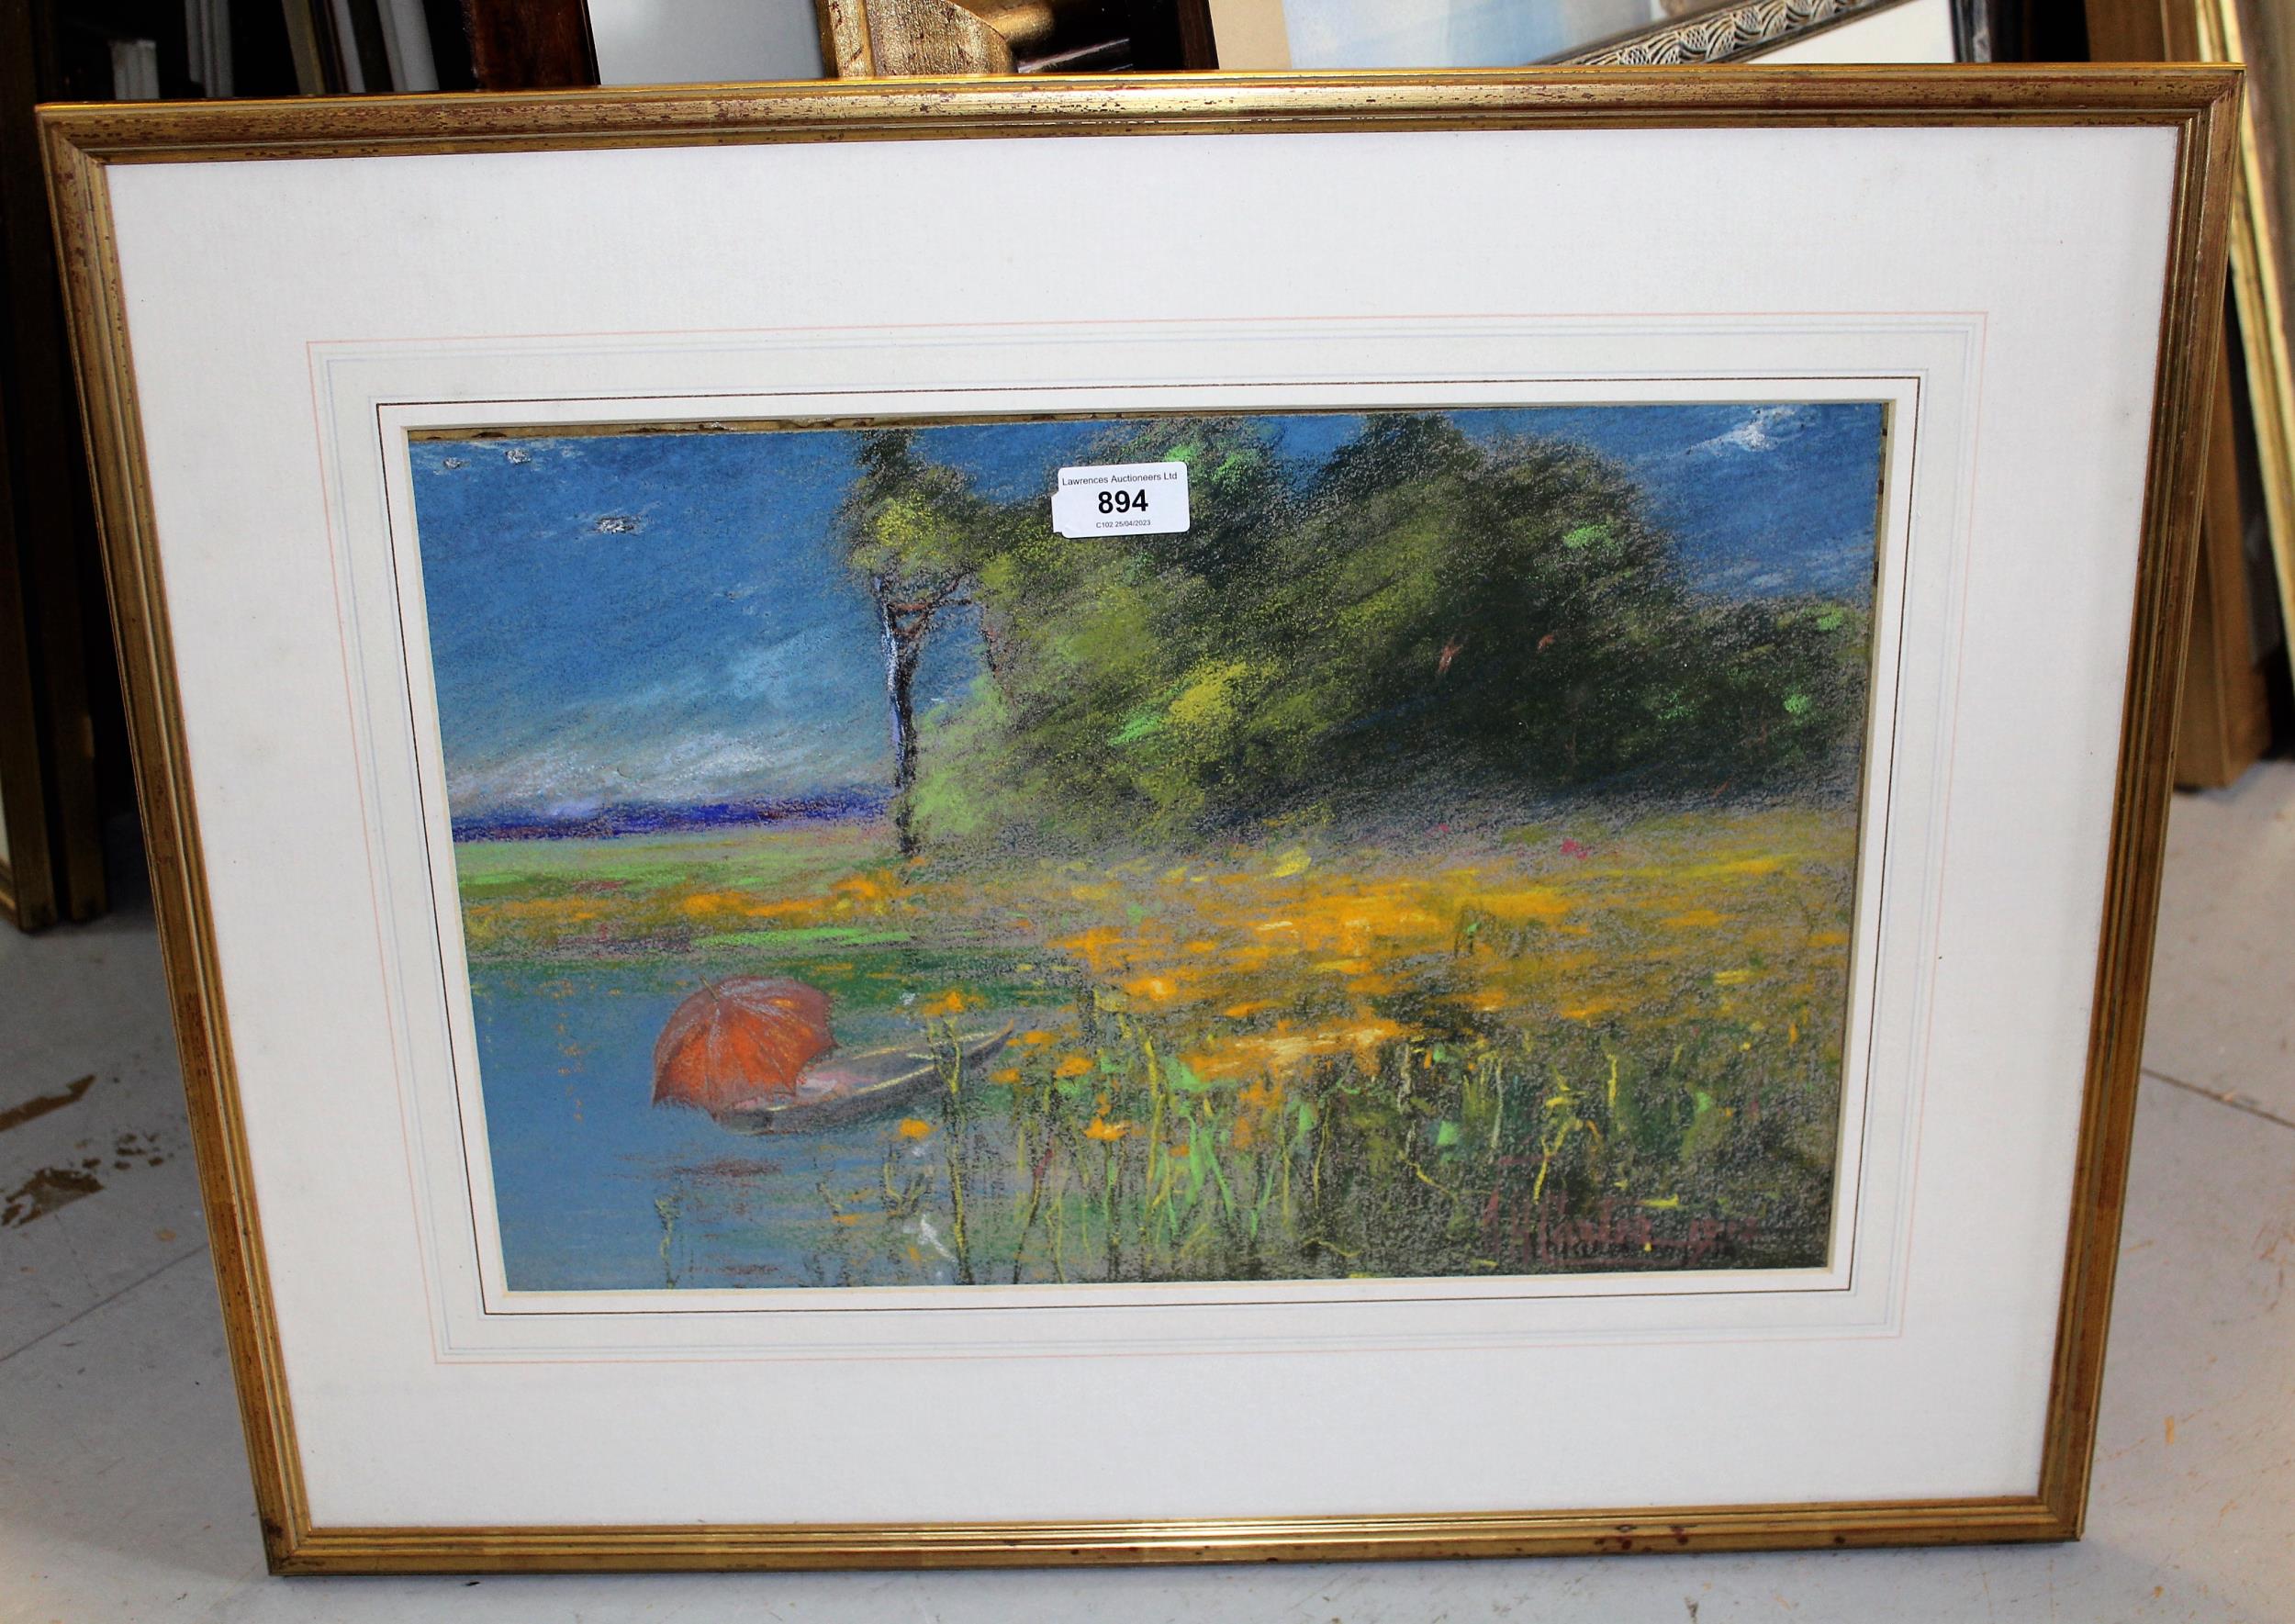 Pastel study of a lake scene with figure in a boat, signed indistinctly, 29cms x 44cms, gilt framed - Image 2 of 2